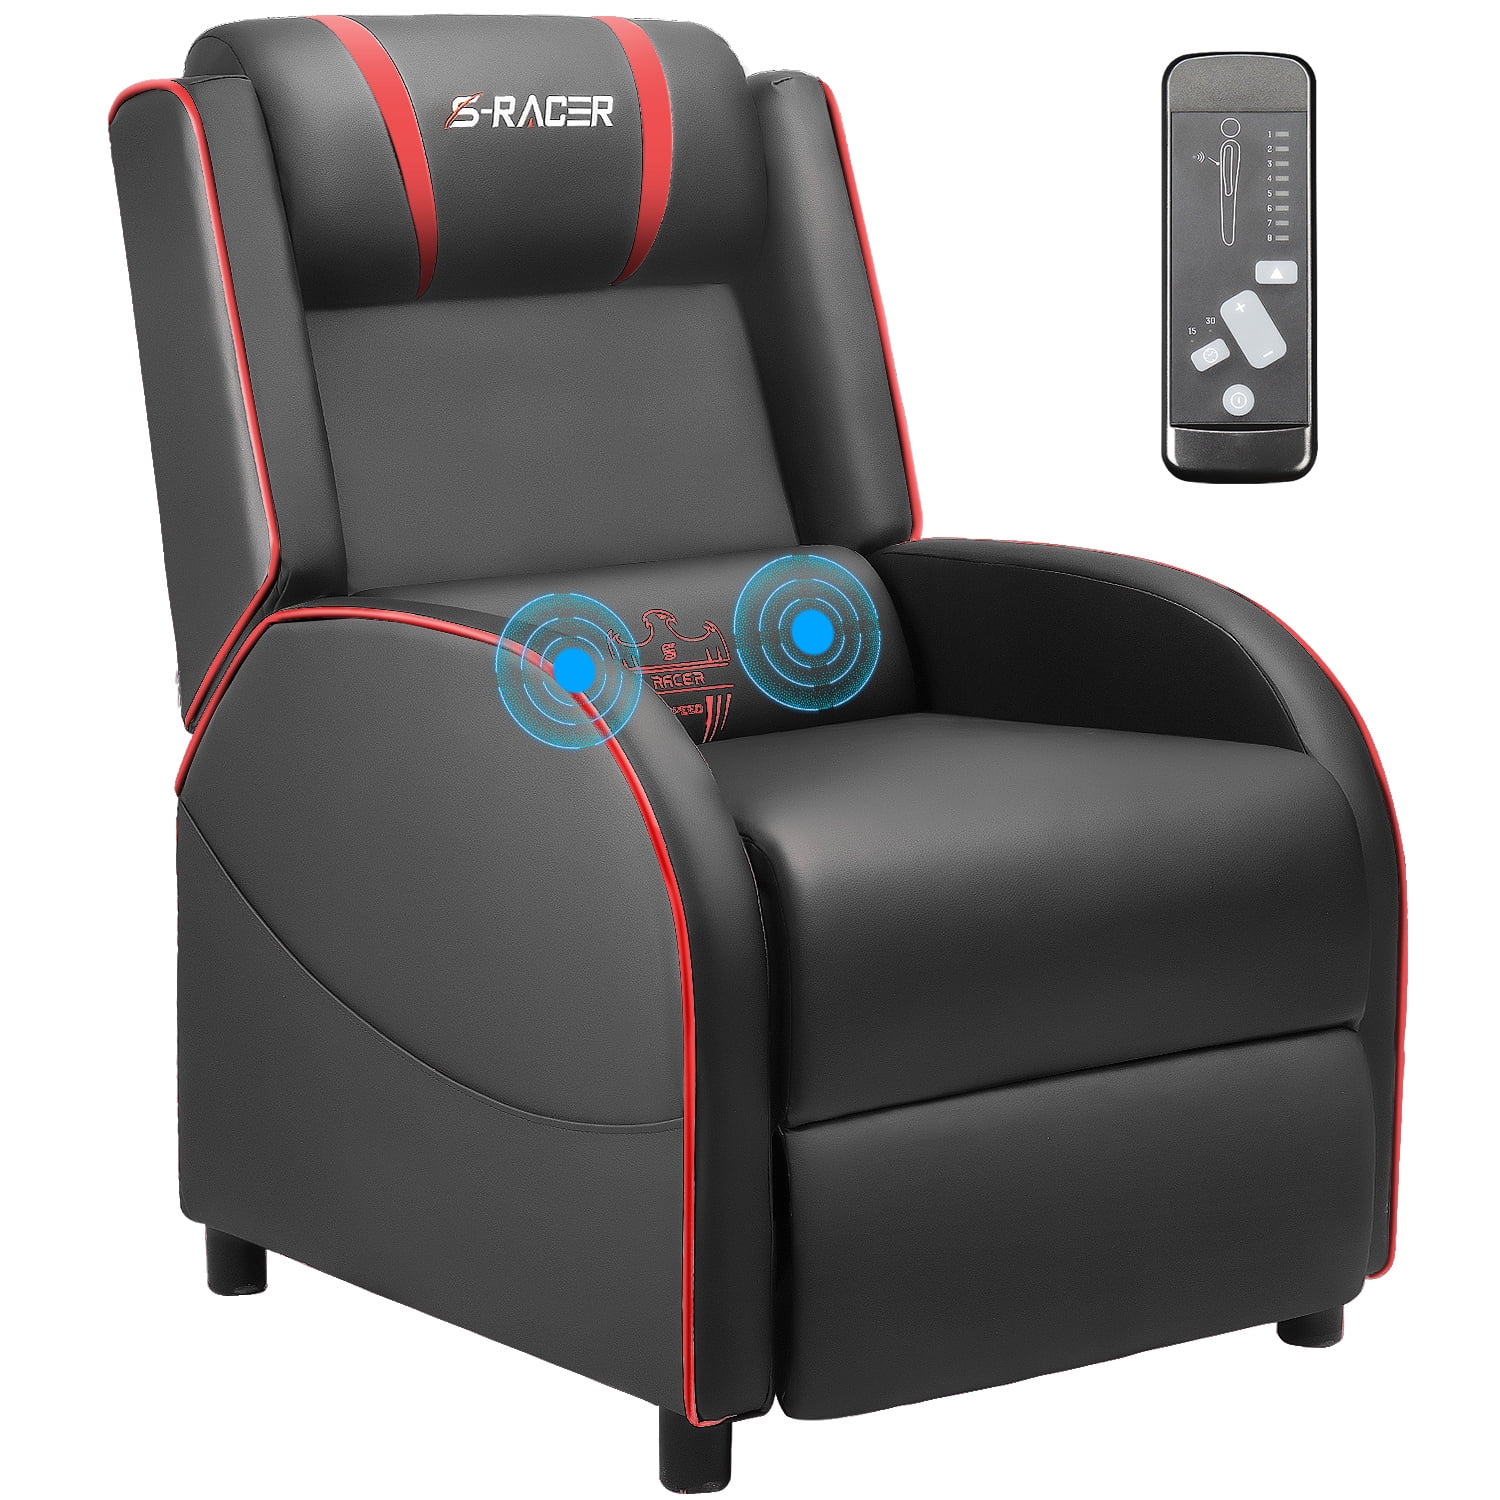 Single Ergonomic Lounge Sofa Modern PU Leather Reclining Home Theater Seating for Living & Gaming Room Massage Gaming Recliner Chair with Footrest Racing Style Black+Blue 